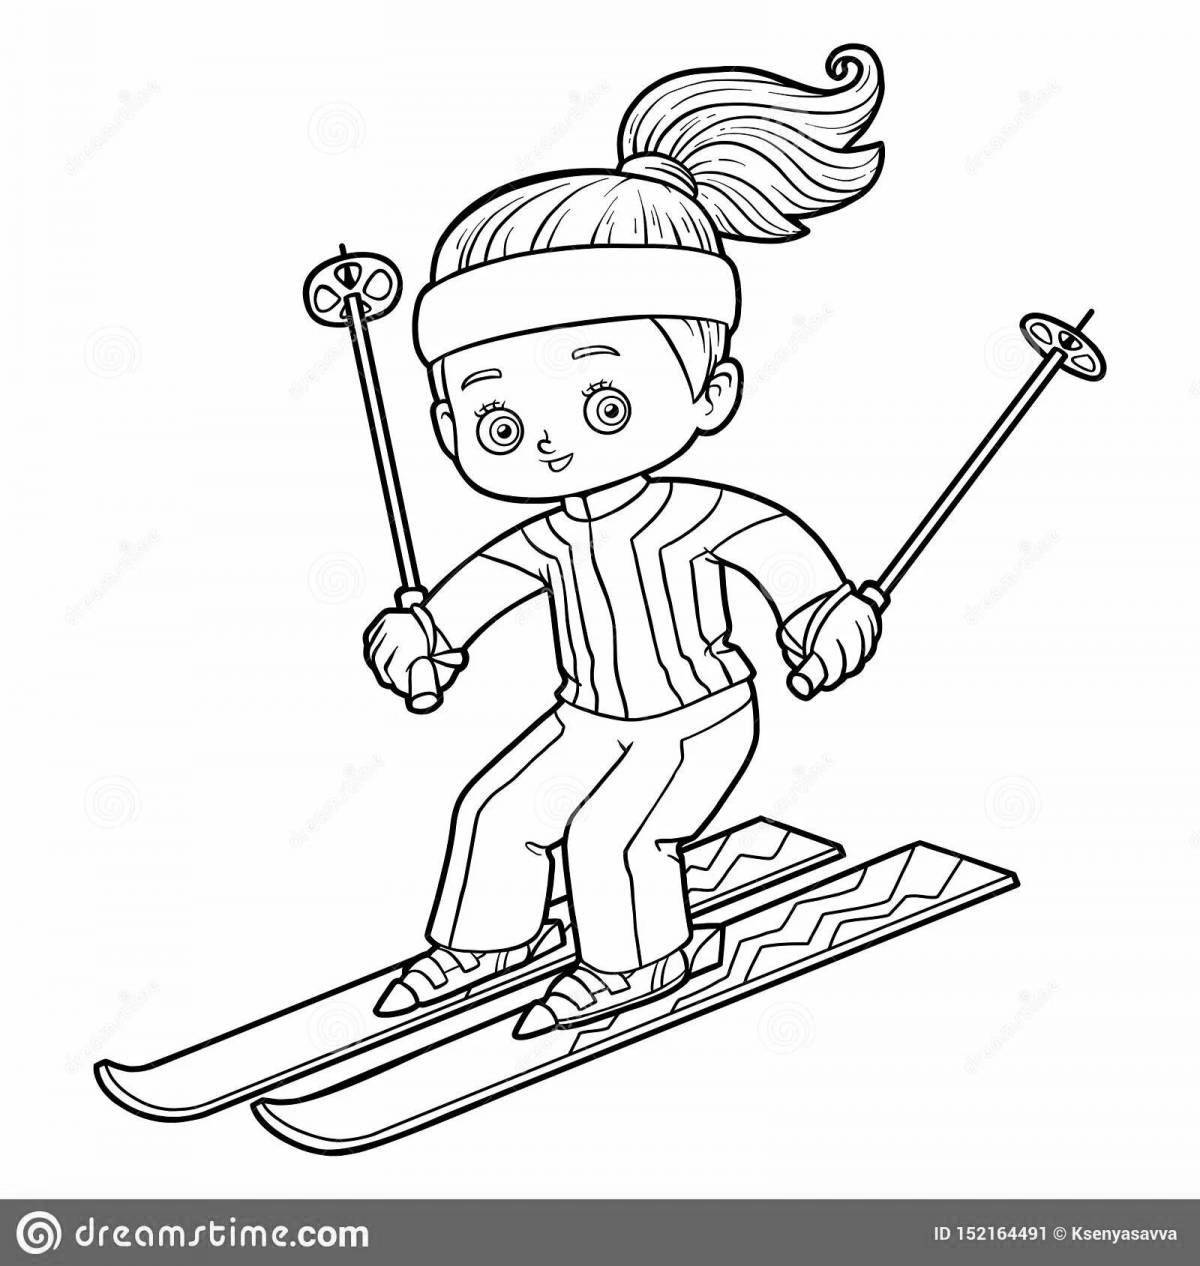 Outstanding ski coloring book for babies